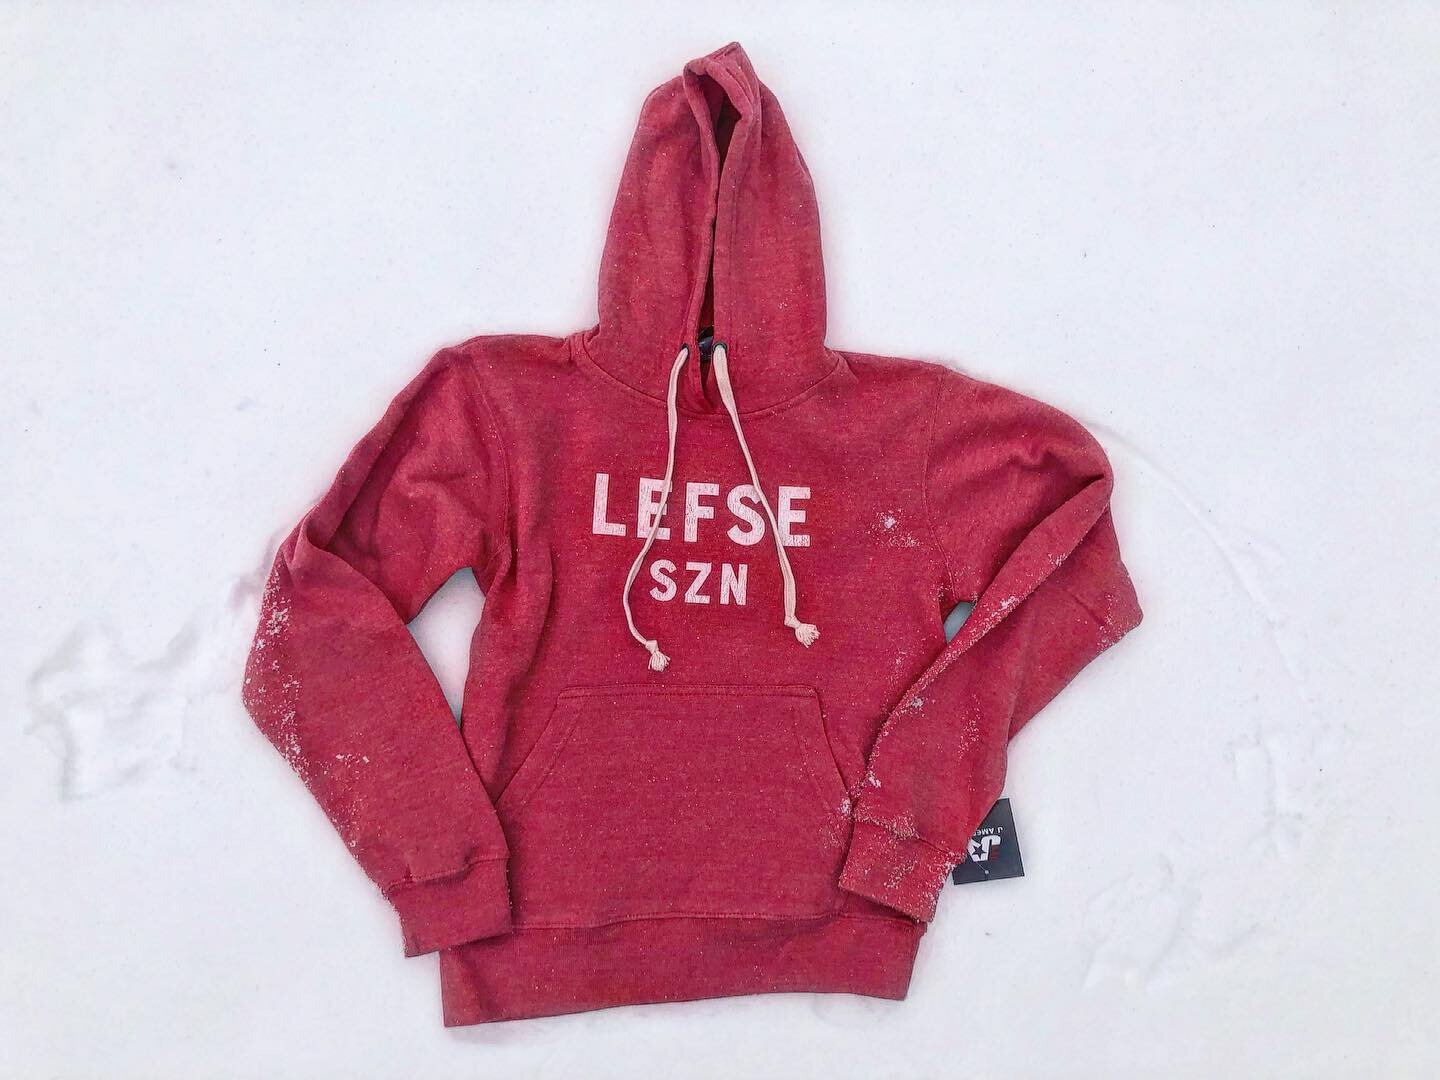 Winter happened. Get your LEFSE SZN sweatshirt and stay warm out there! #lostinfargo #linkinbio